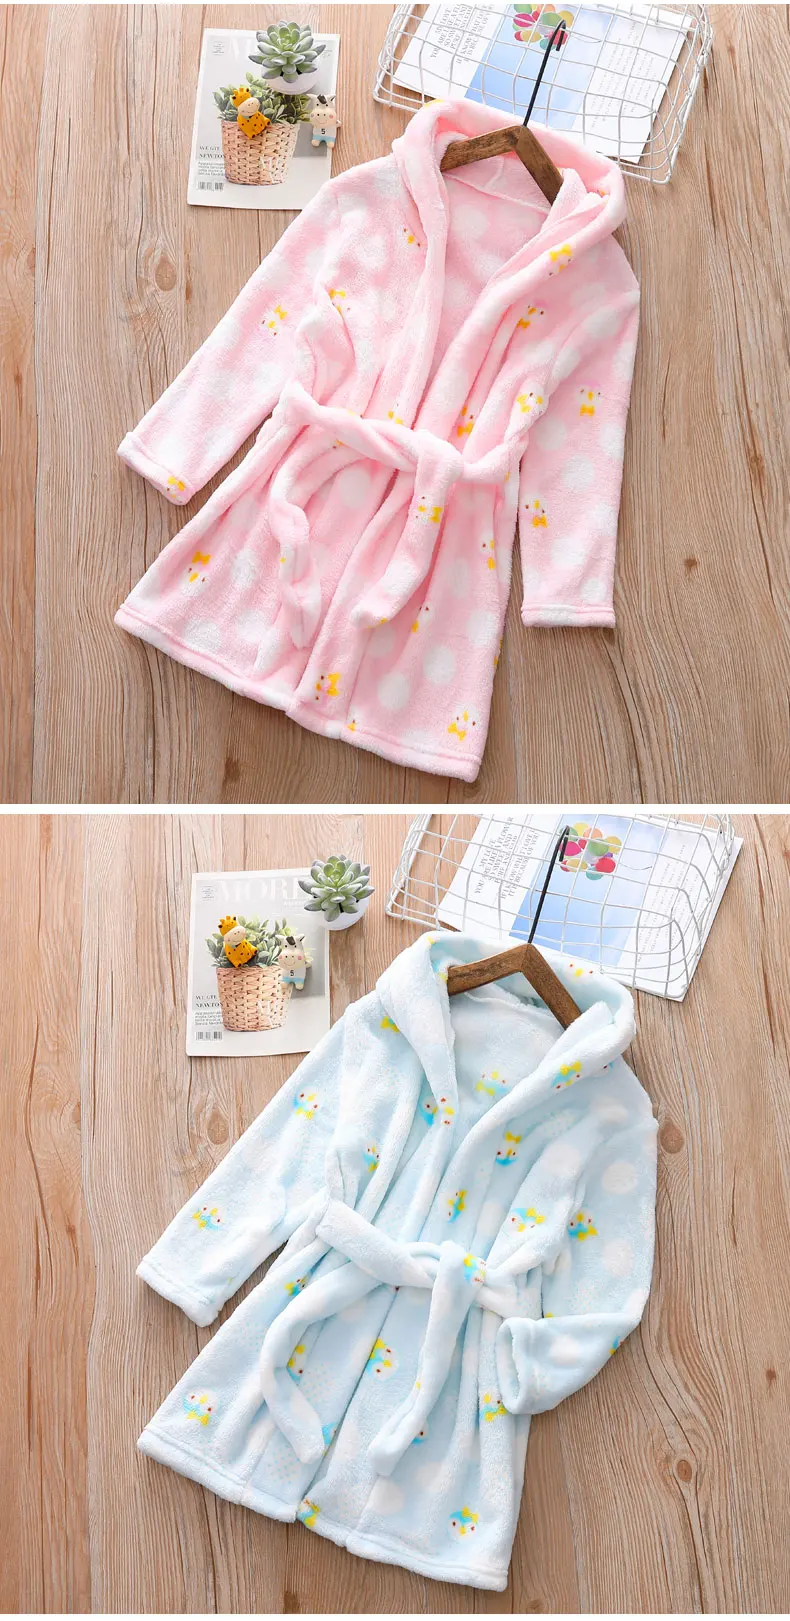 Sifafos Baby kids clothes for boys and girls winter Bathrobe Flannel Pajamas children home wear Hooded Sleepwear Coral Velvet